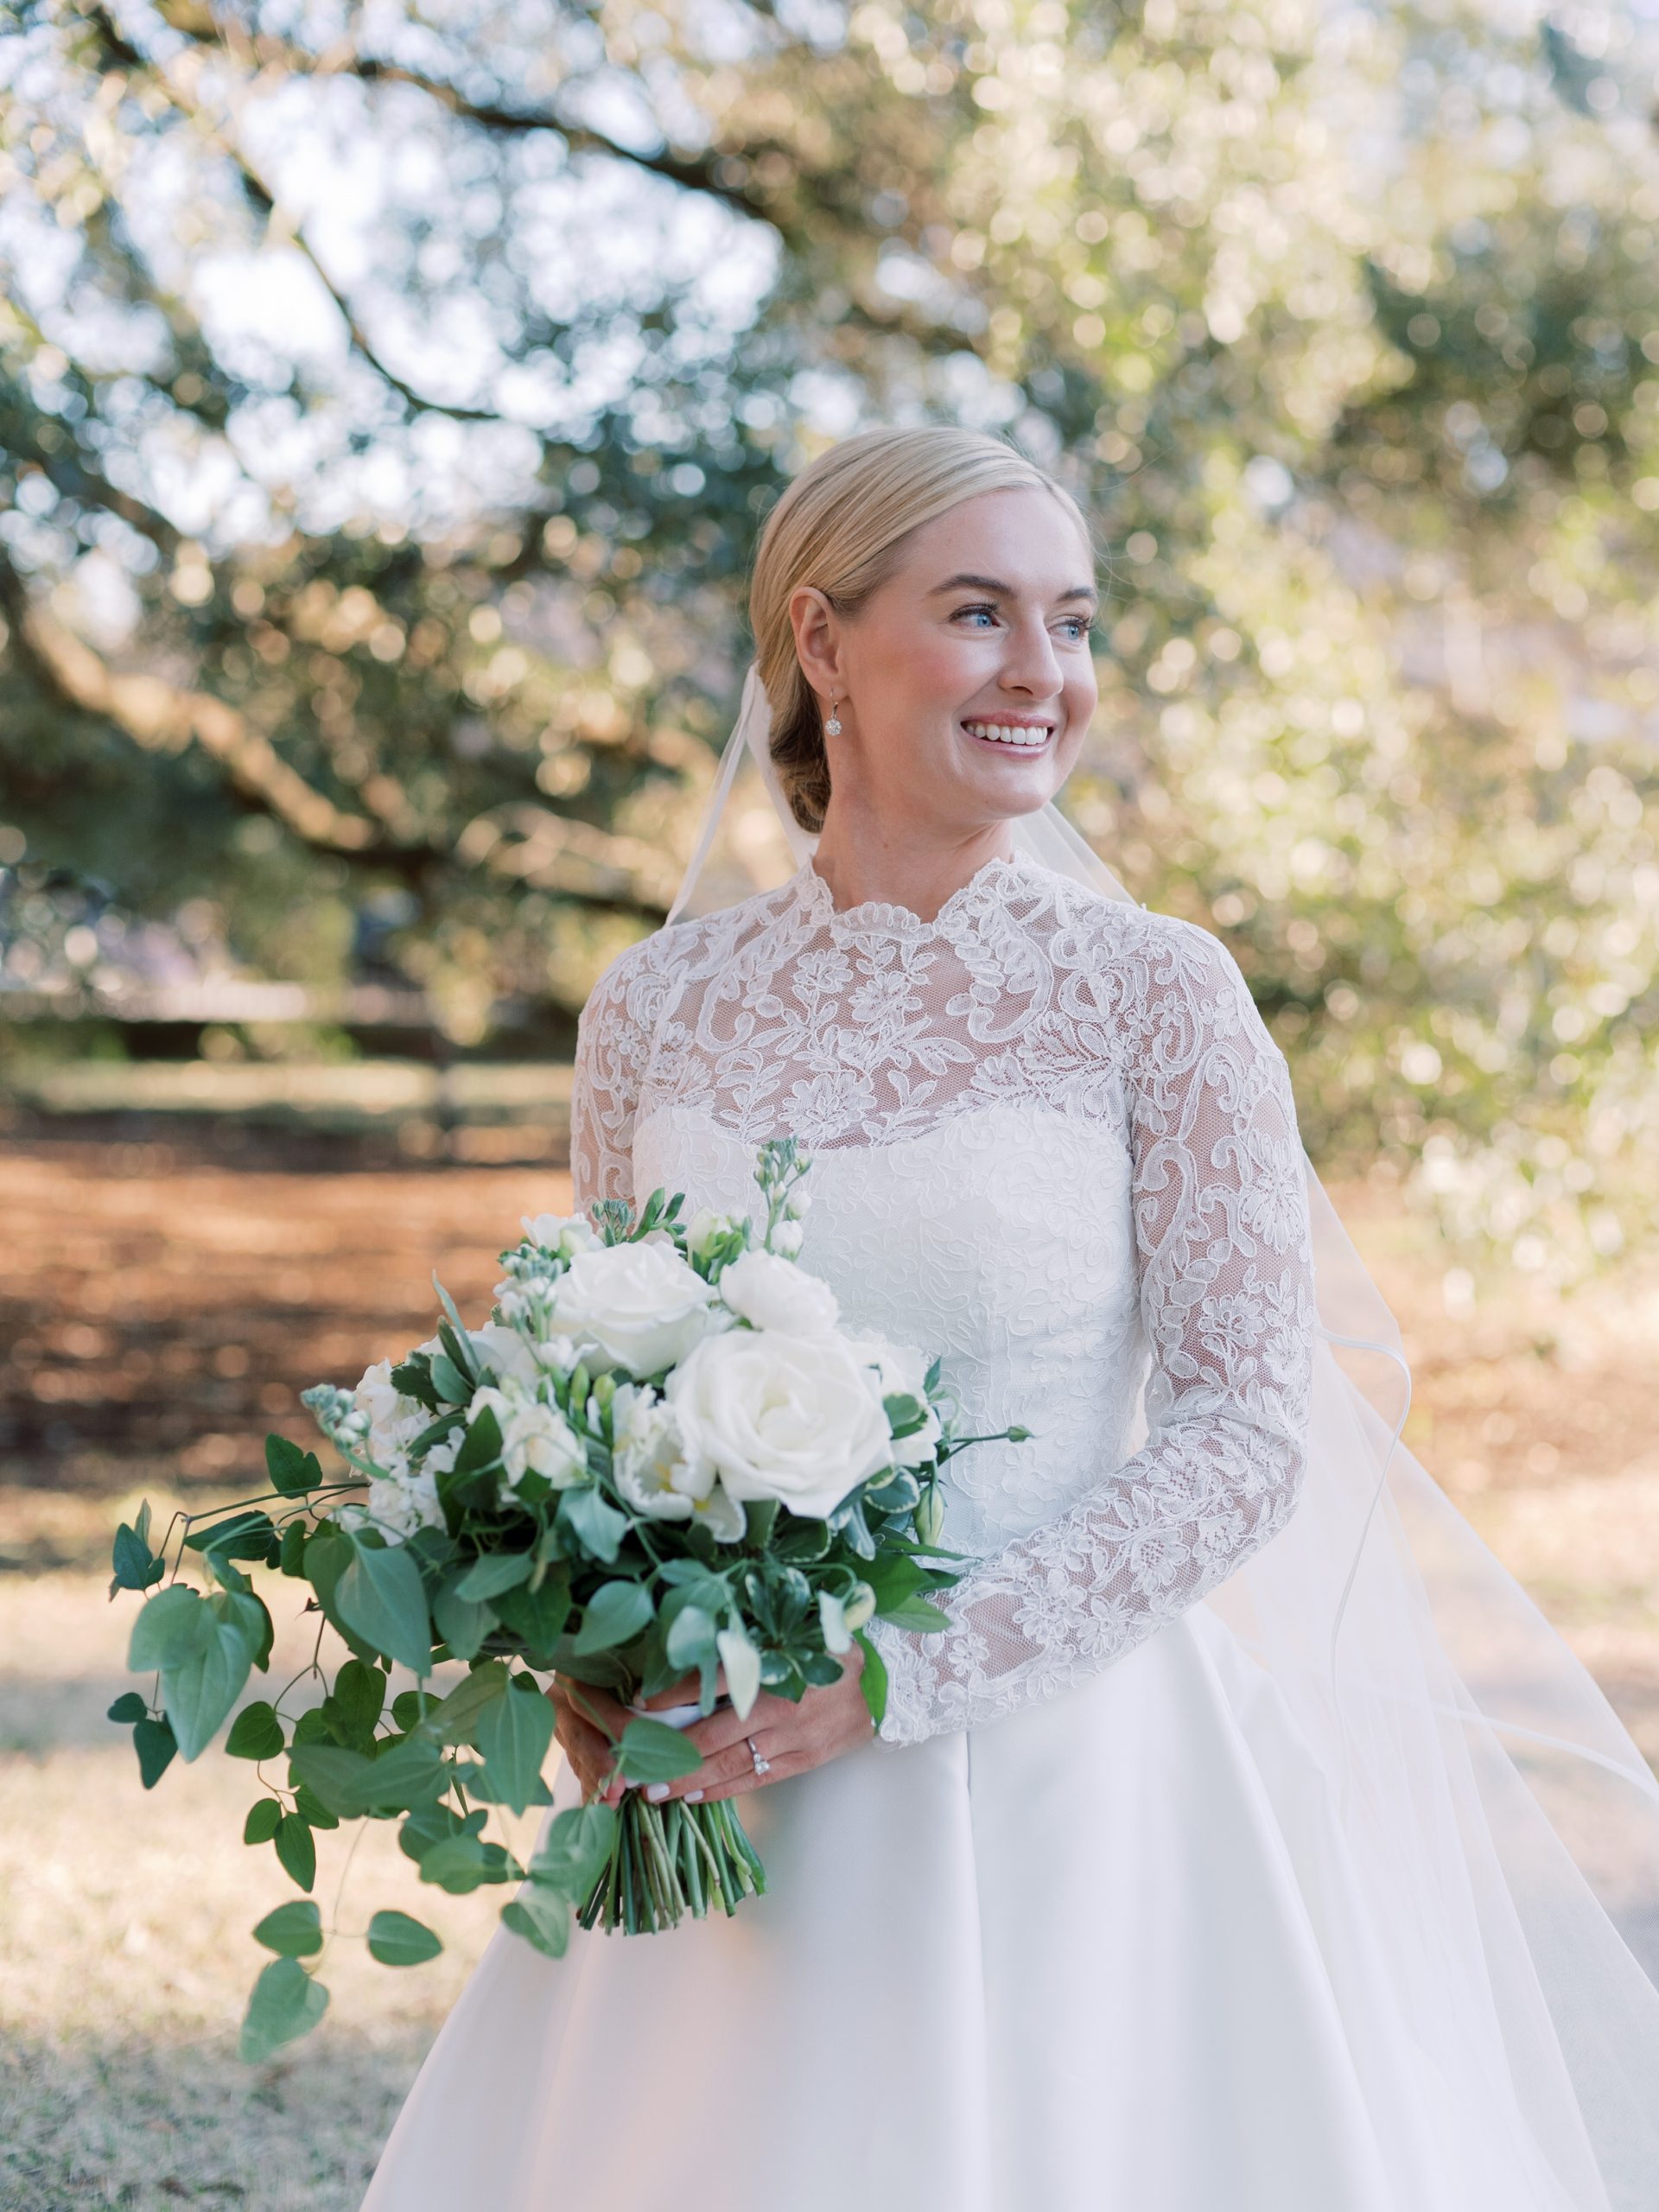 Meg found the dress of her dreams at Hayden Olivia Bridal, which included a lace bolero for the wedding ceremony. Her parents gave her a family heirloom diamond brooch, which Heathcliff Jewelers made into a comb for Meg to wear in her hair on the wedding day. 